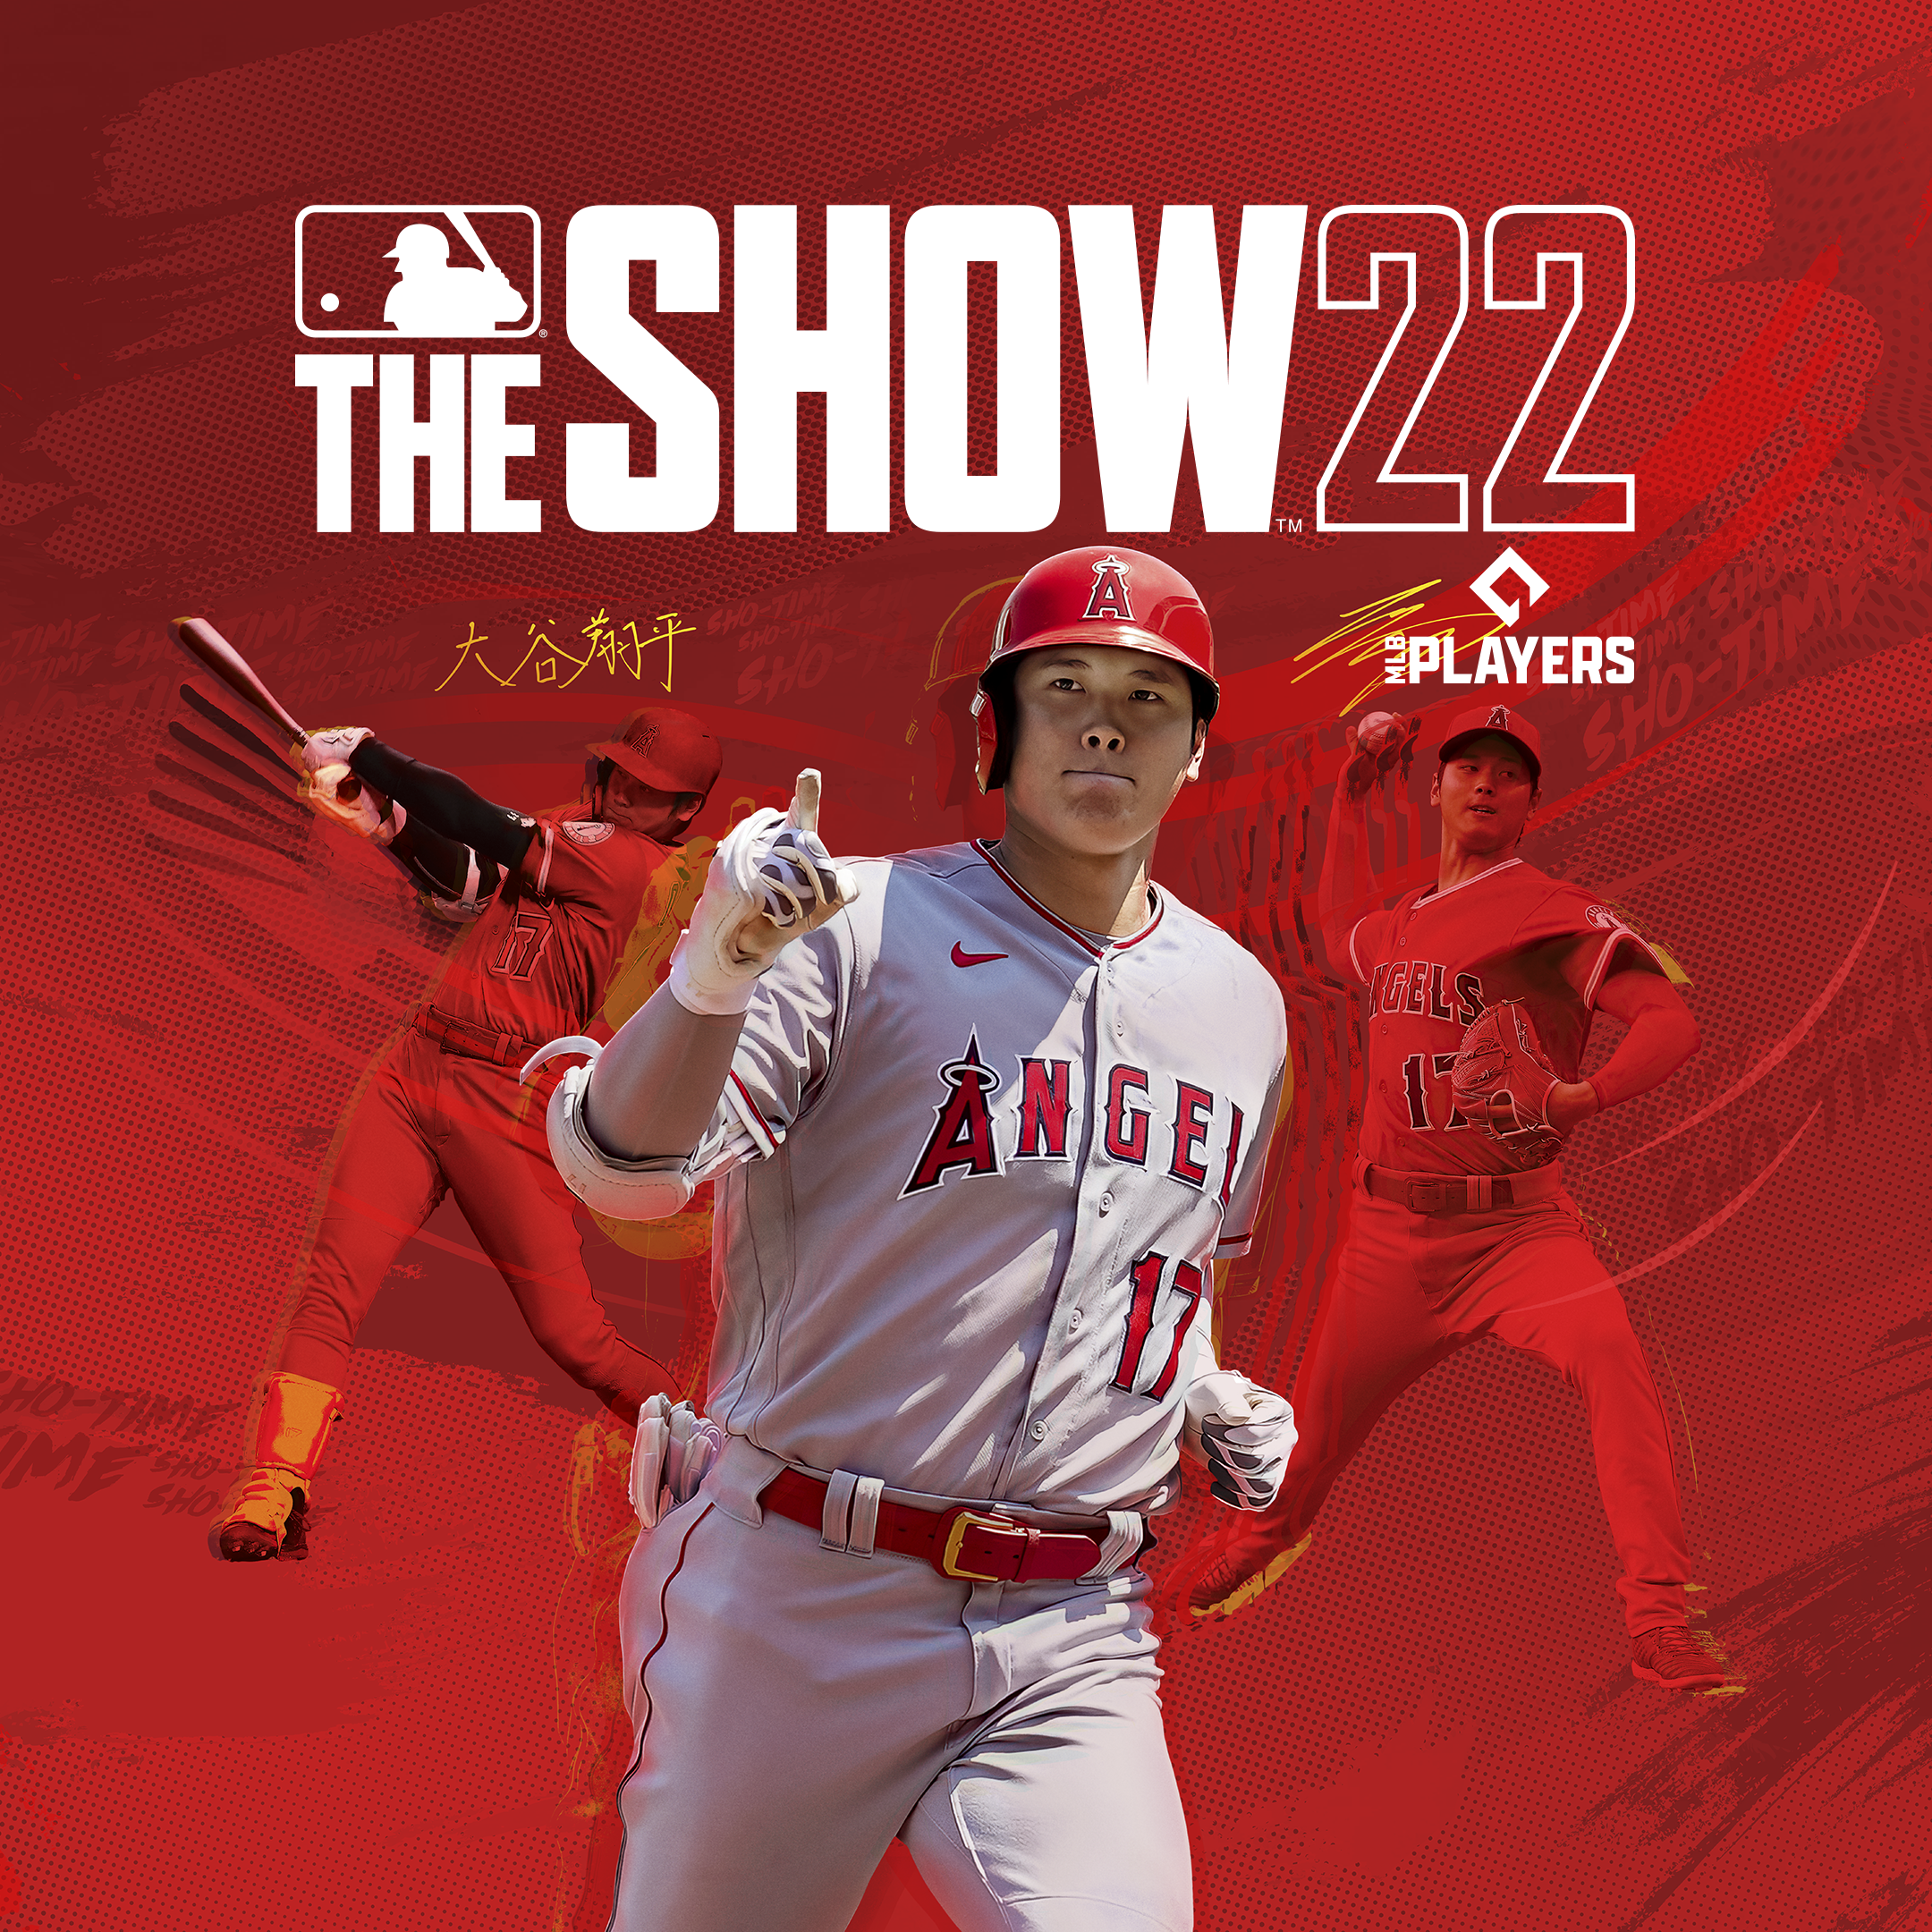 MLB The show